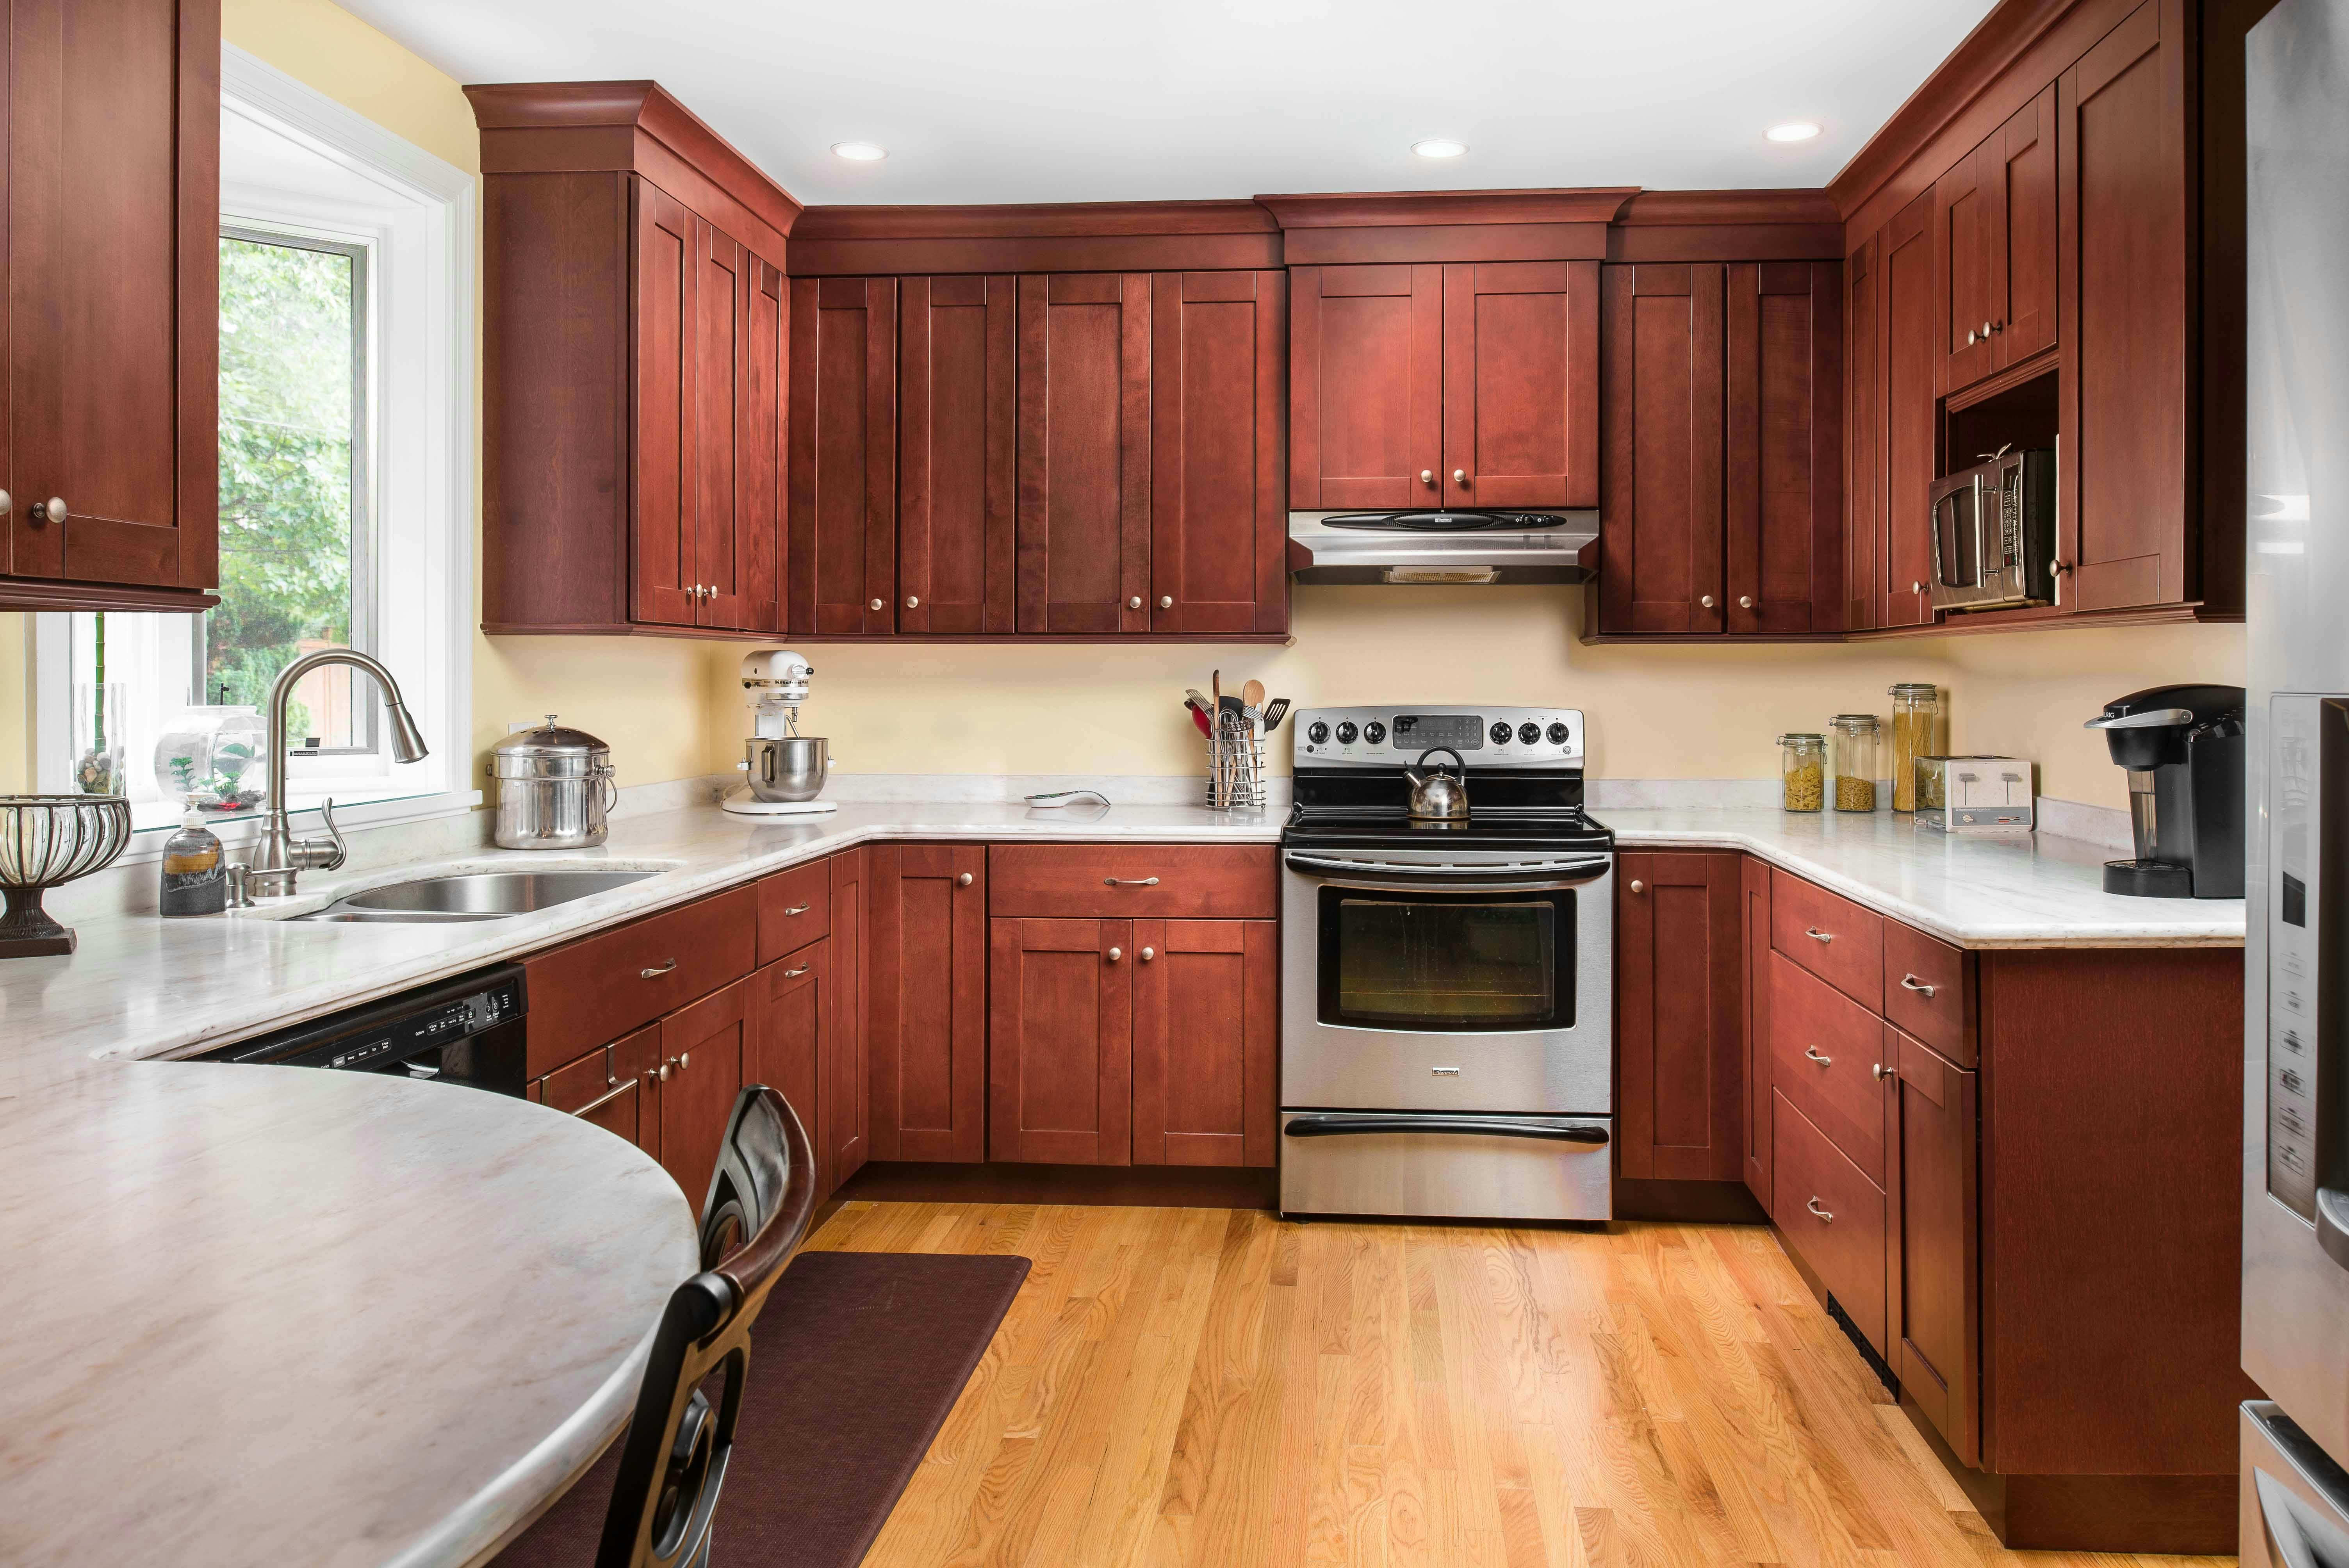 Why shaker style kitchen cabinets never go out of style